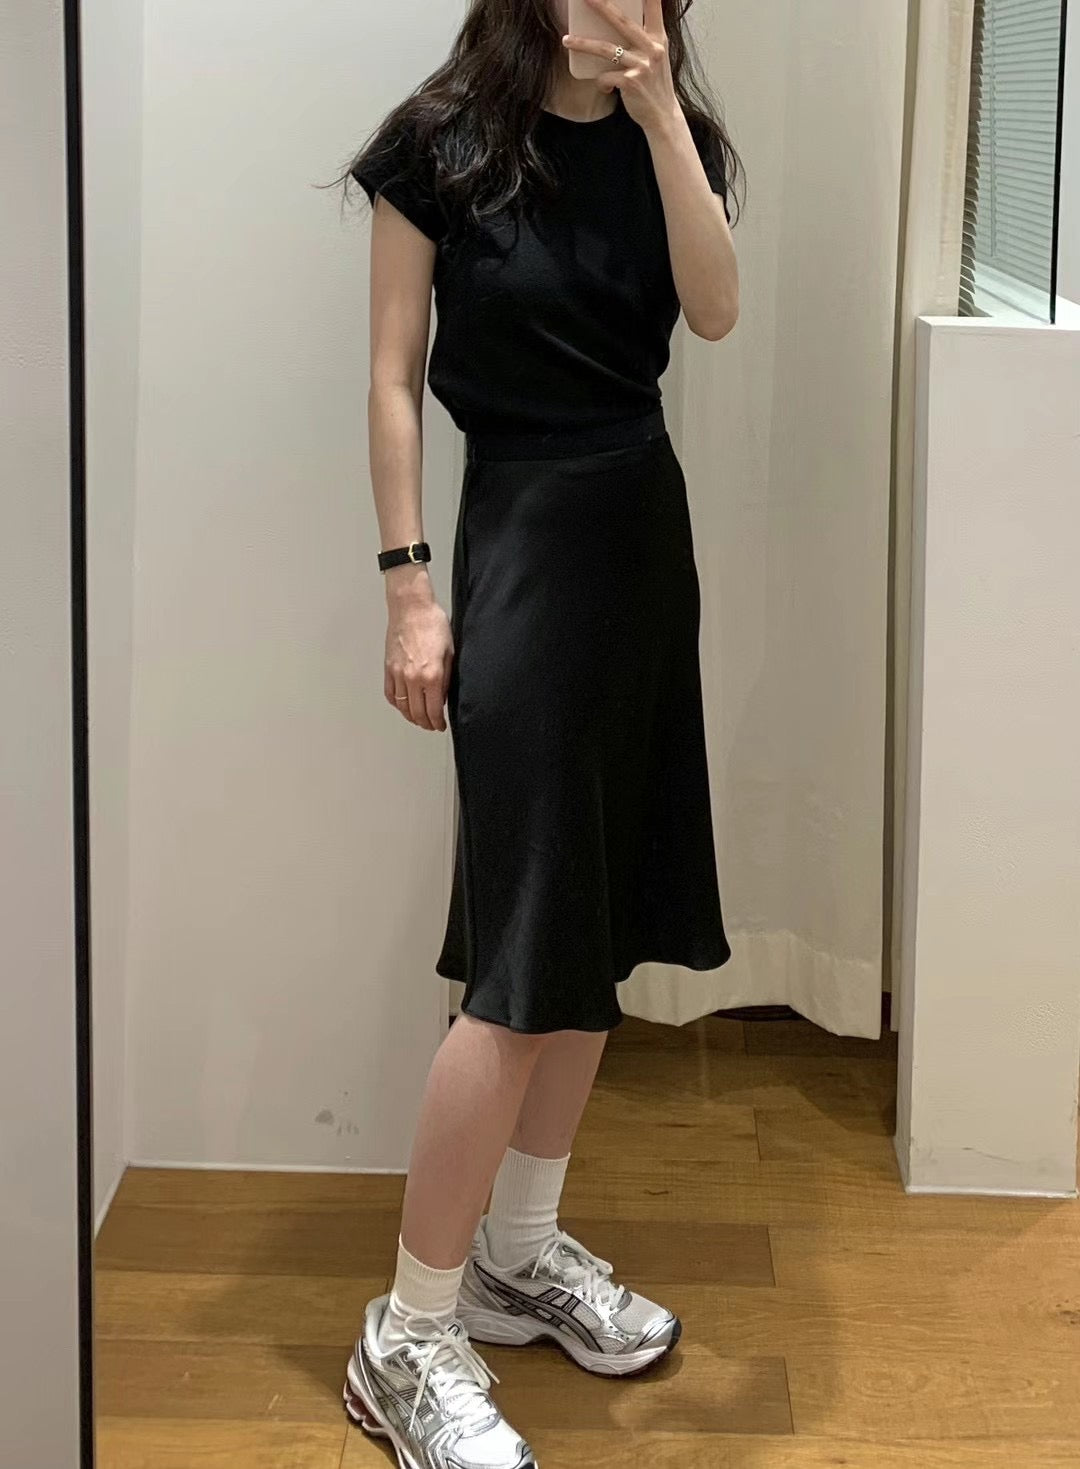 SS08 - Carrie Satin Skirt (highly recommend!)